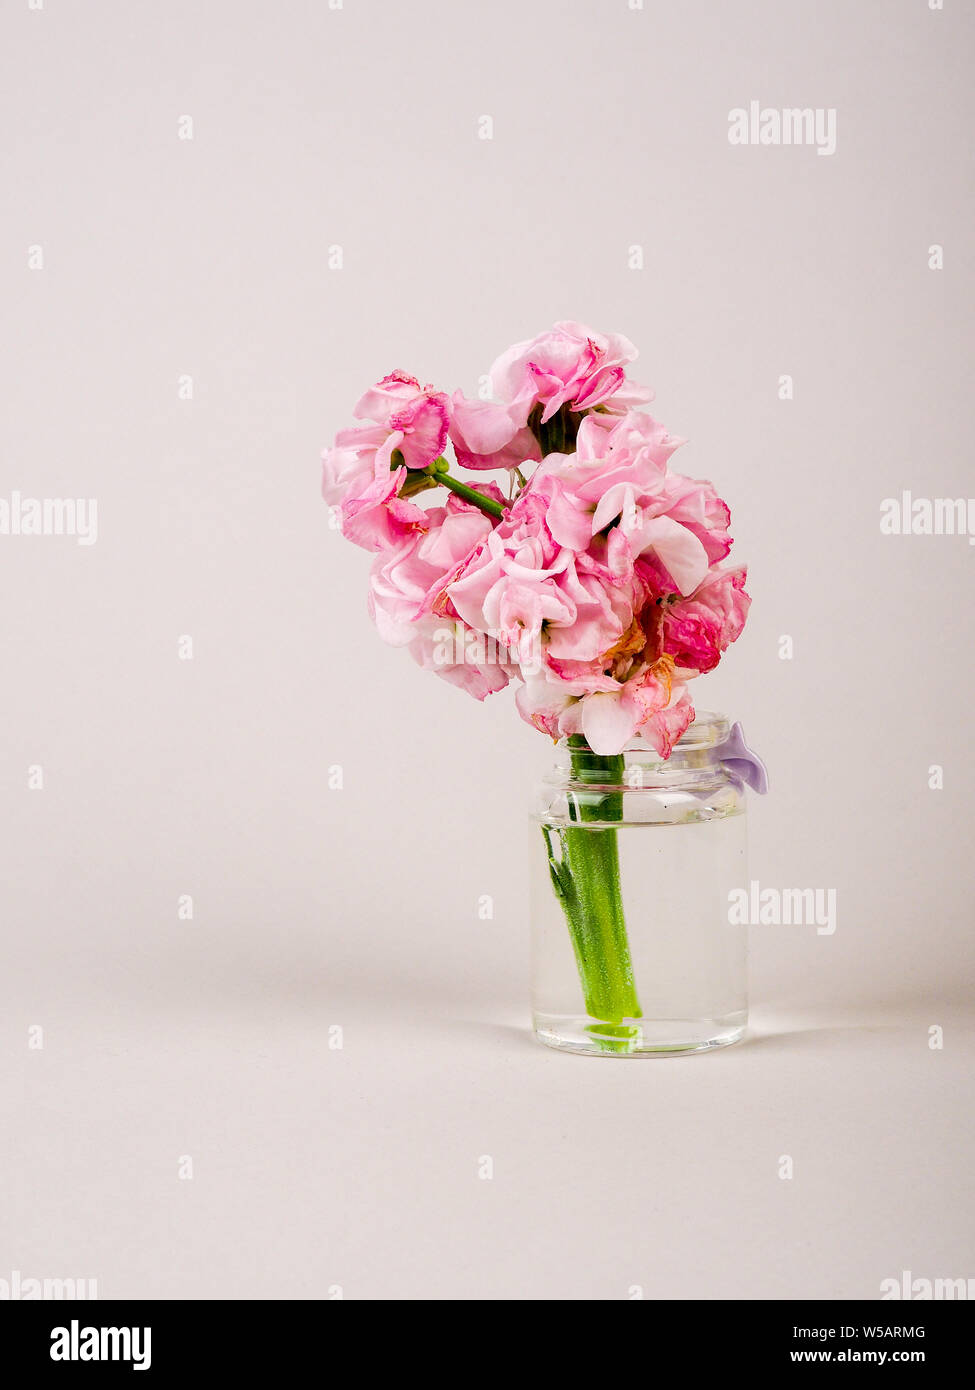 beautiful pink flowers in a bottle on a uniform background. copy space. Stock Photo